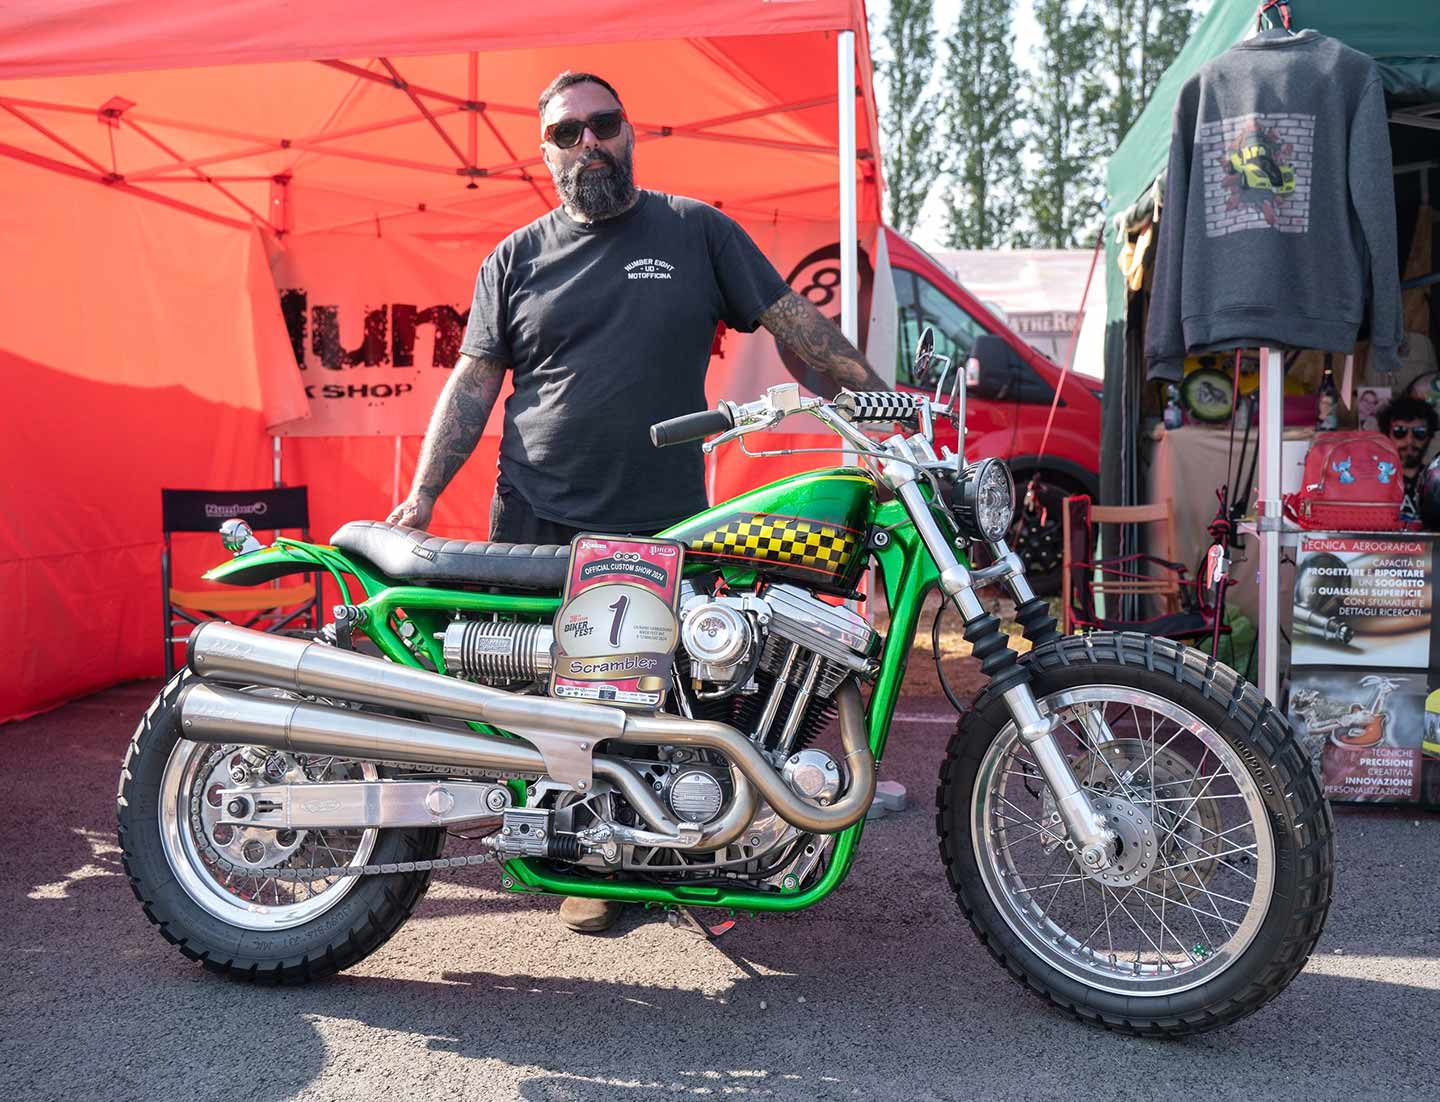 Taking the top prize in the Scrambler category was this H-D Sportster from Number 8 Workshop.